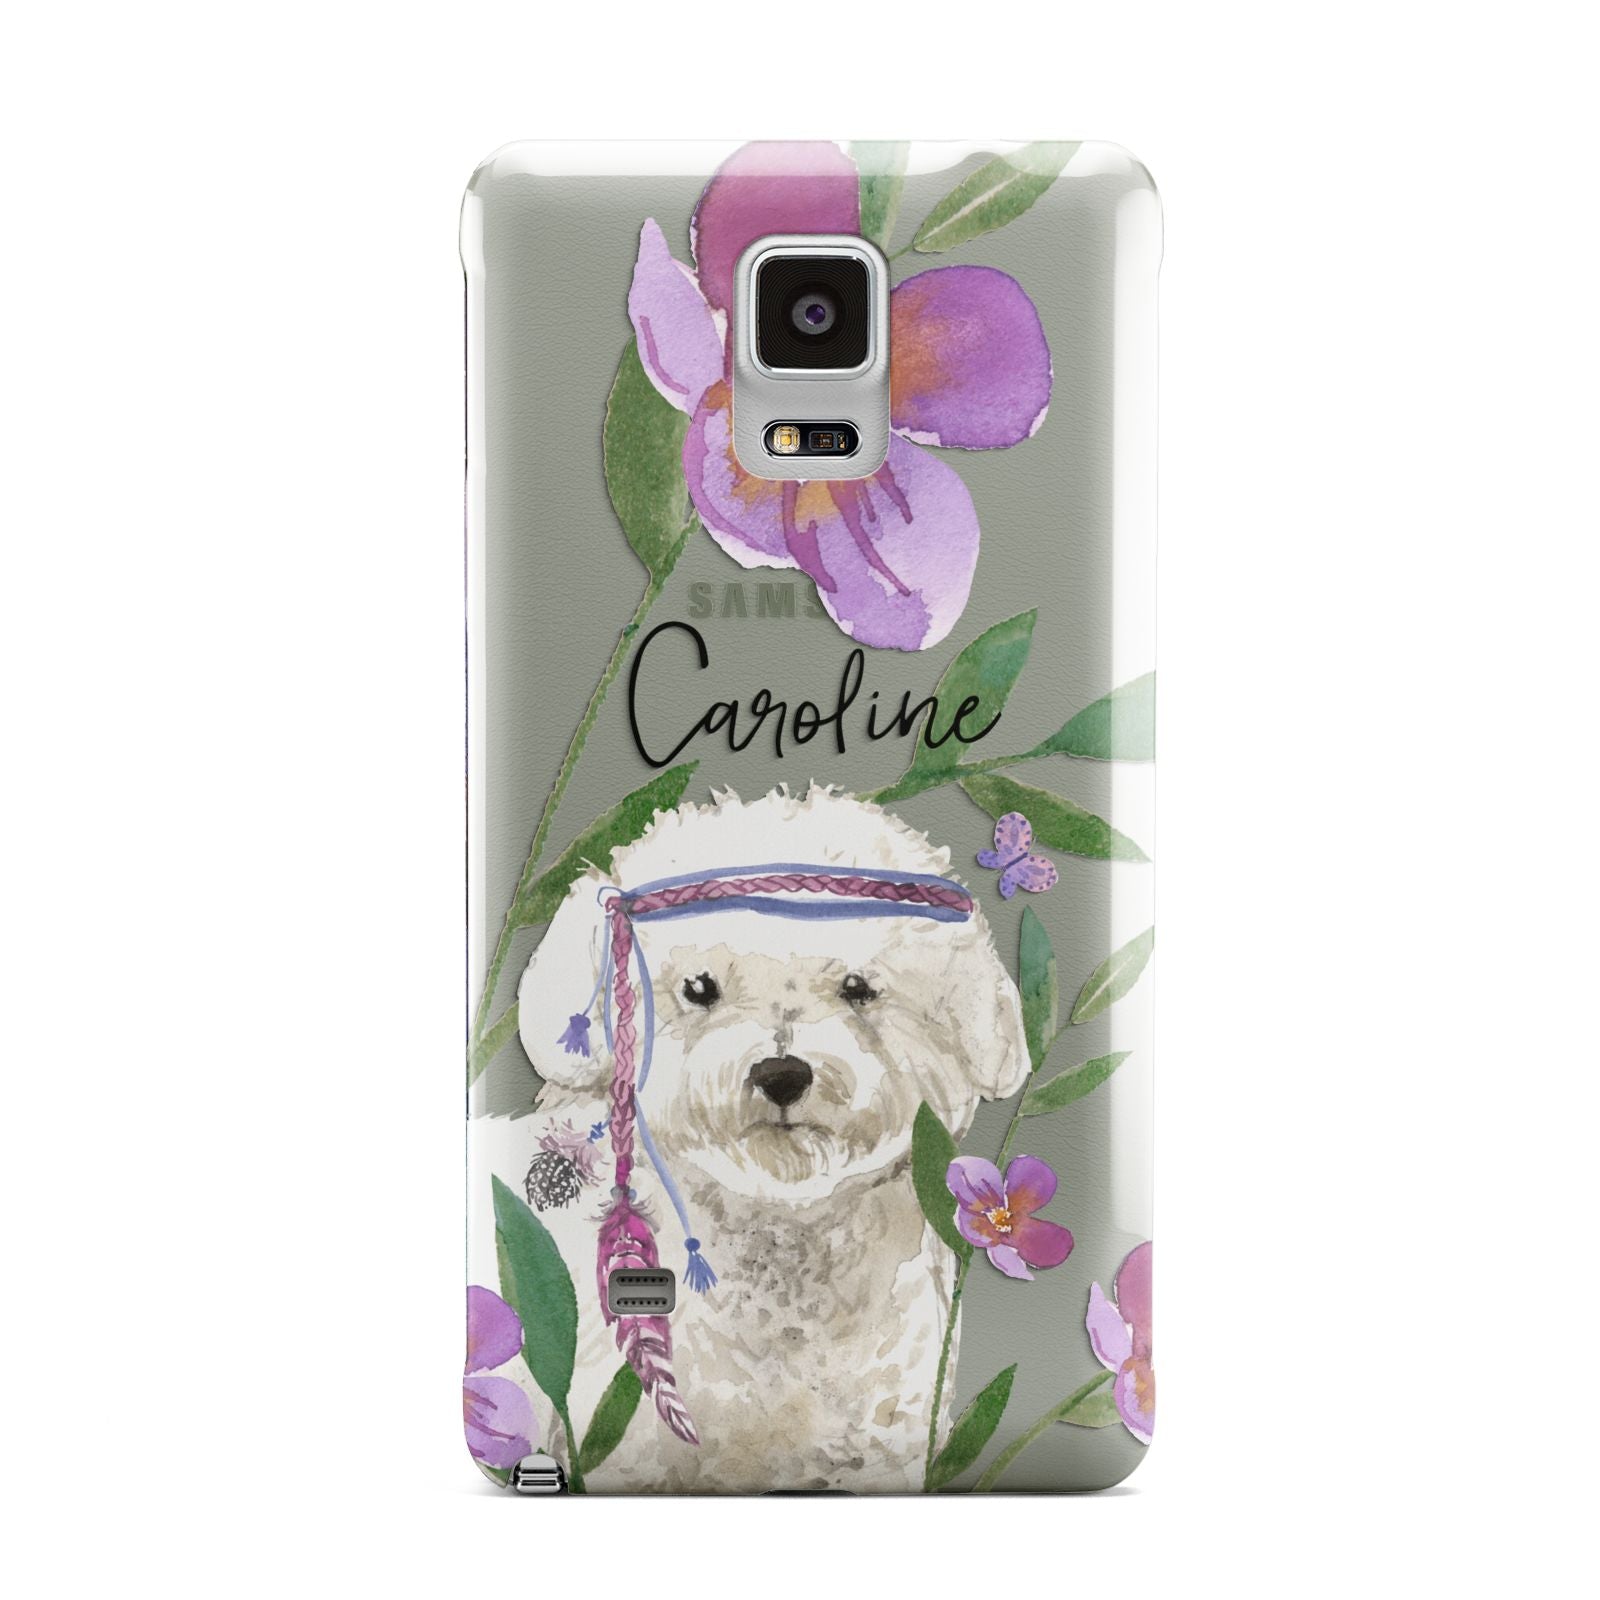 Personalised Bichon Frise Samsung Galaxy Note 4 Case